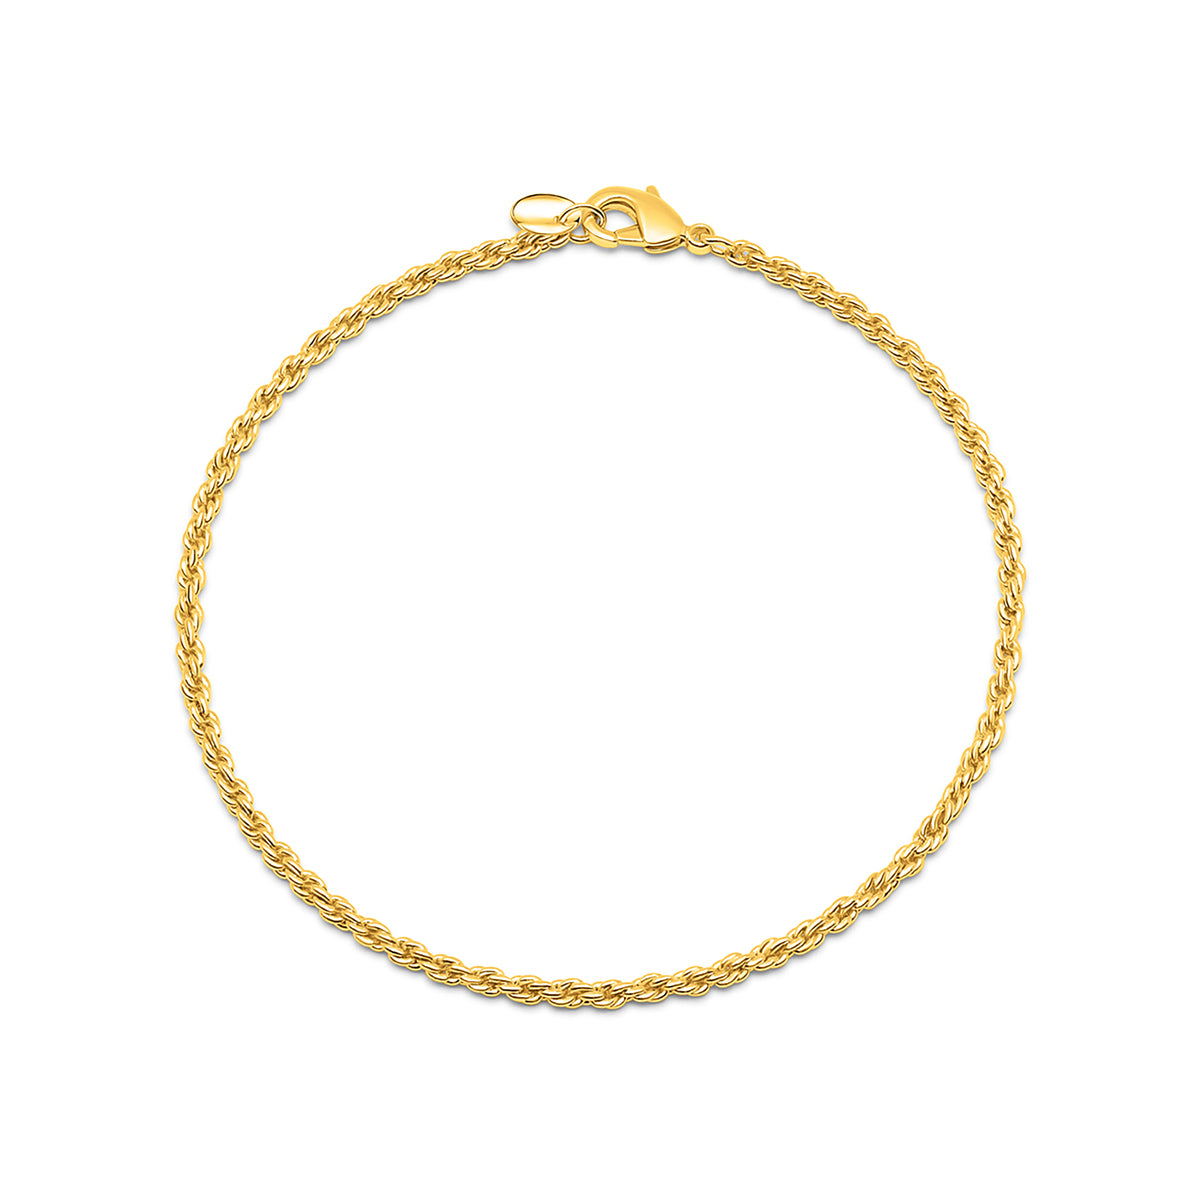 Gold plated rope chain bracelet